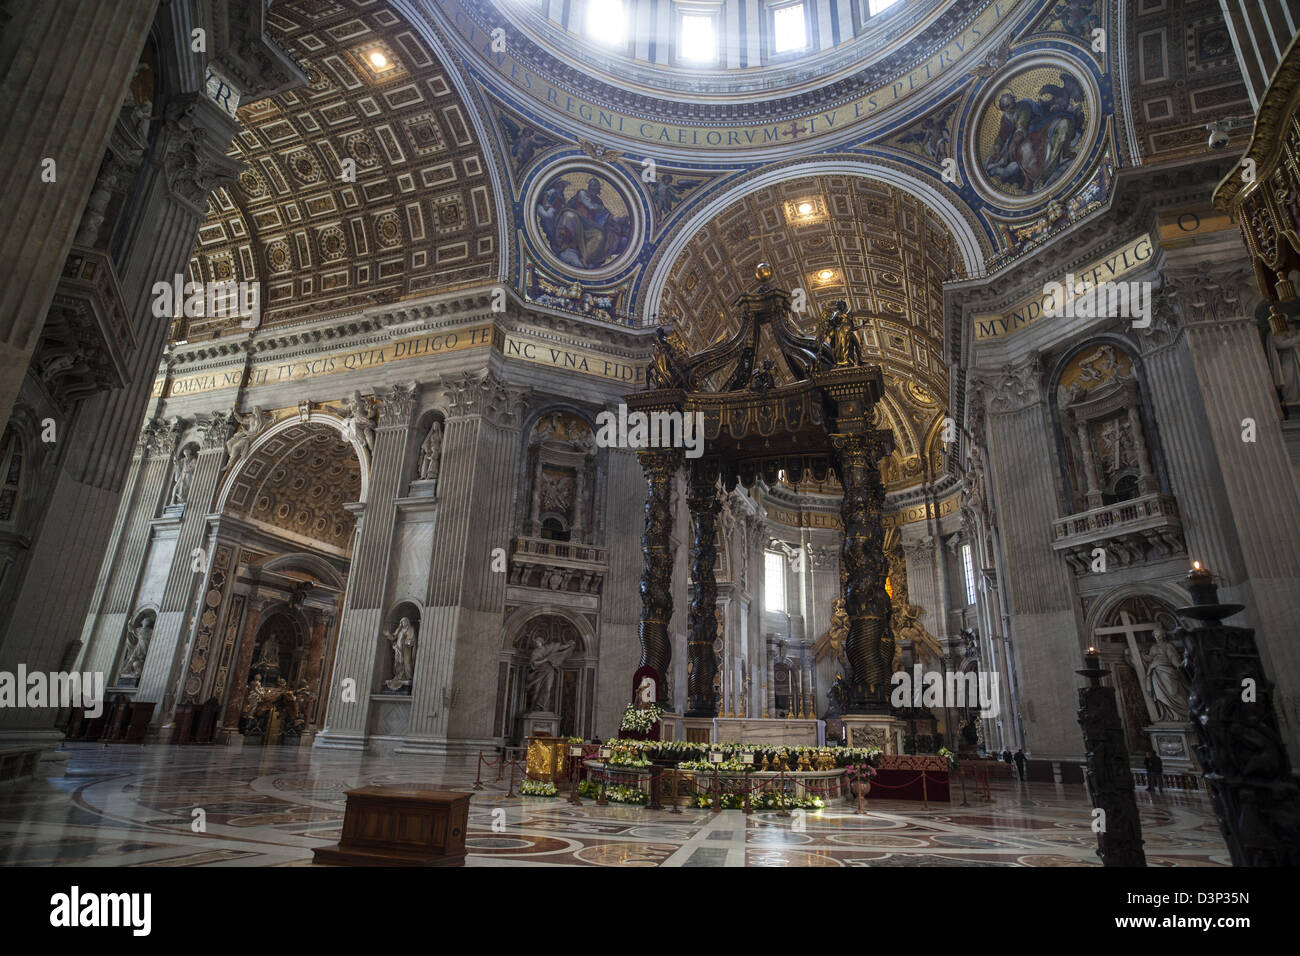 The Baldacchino  designed by Bernini the huge altar canopy with bronze columns in St Peter's Basilica in the Vatican Rome Stock Photo